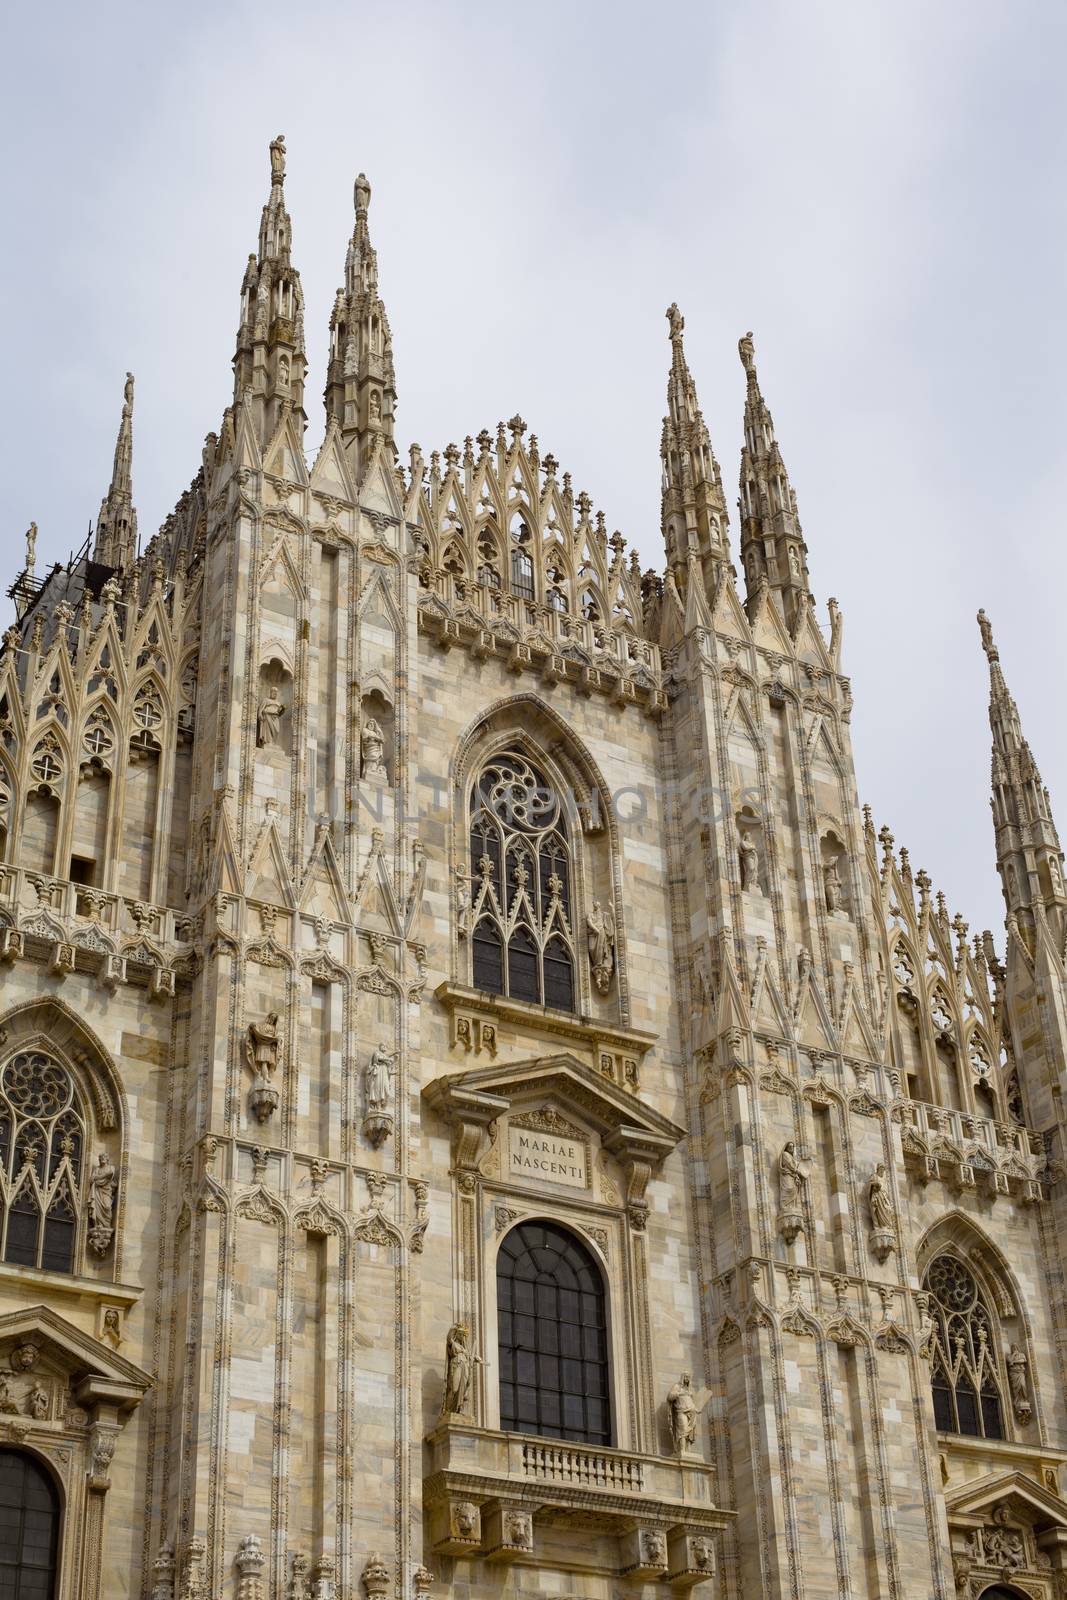 A famous gothic Milan cathedral in Italy
